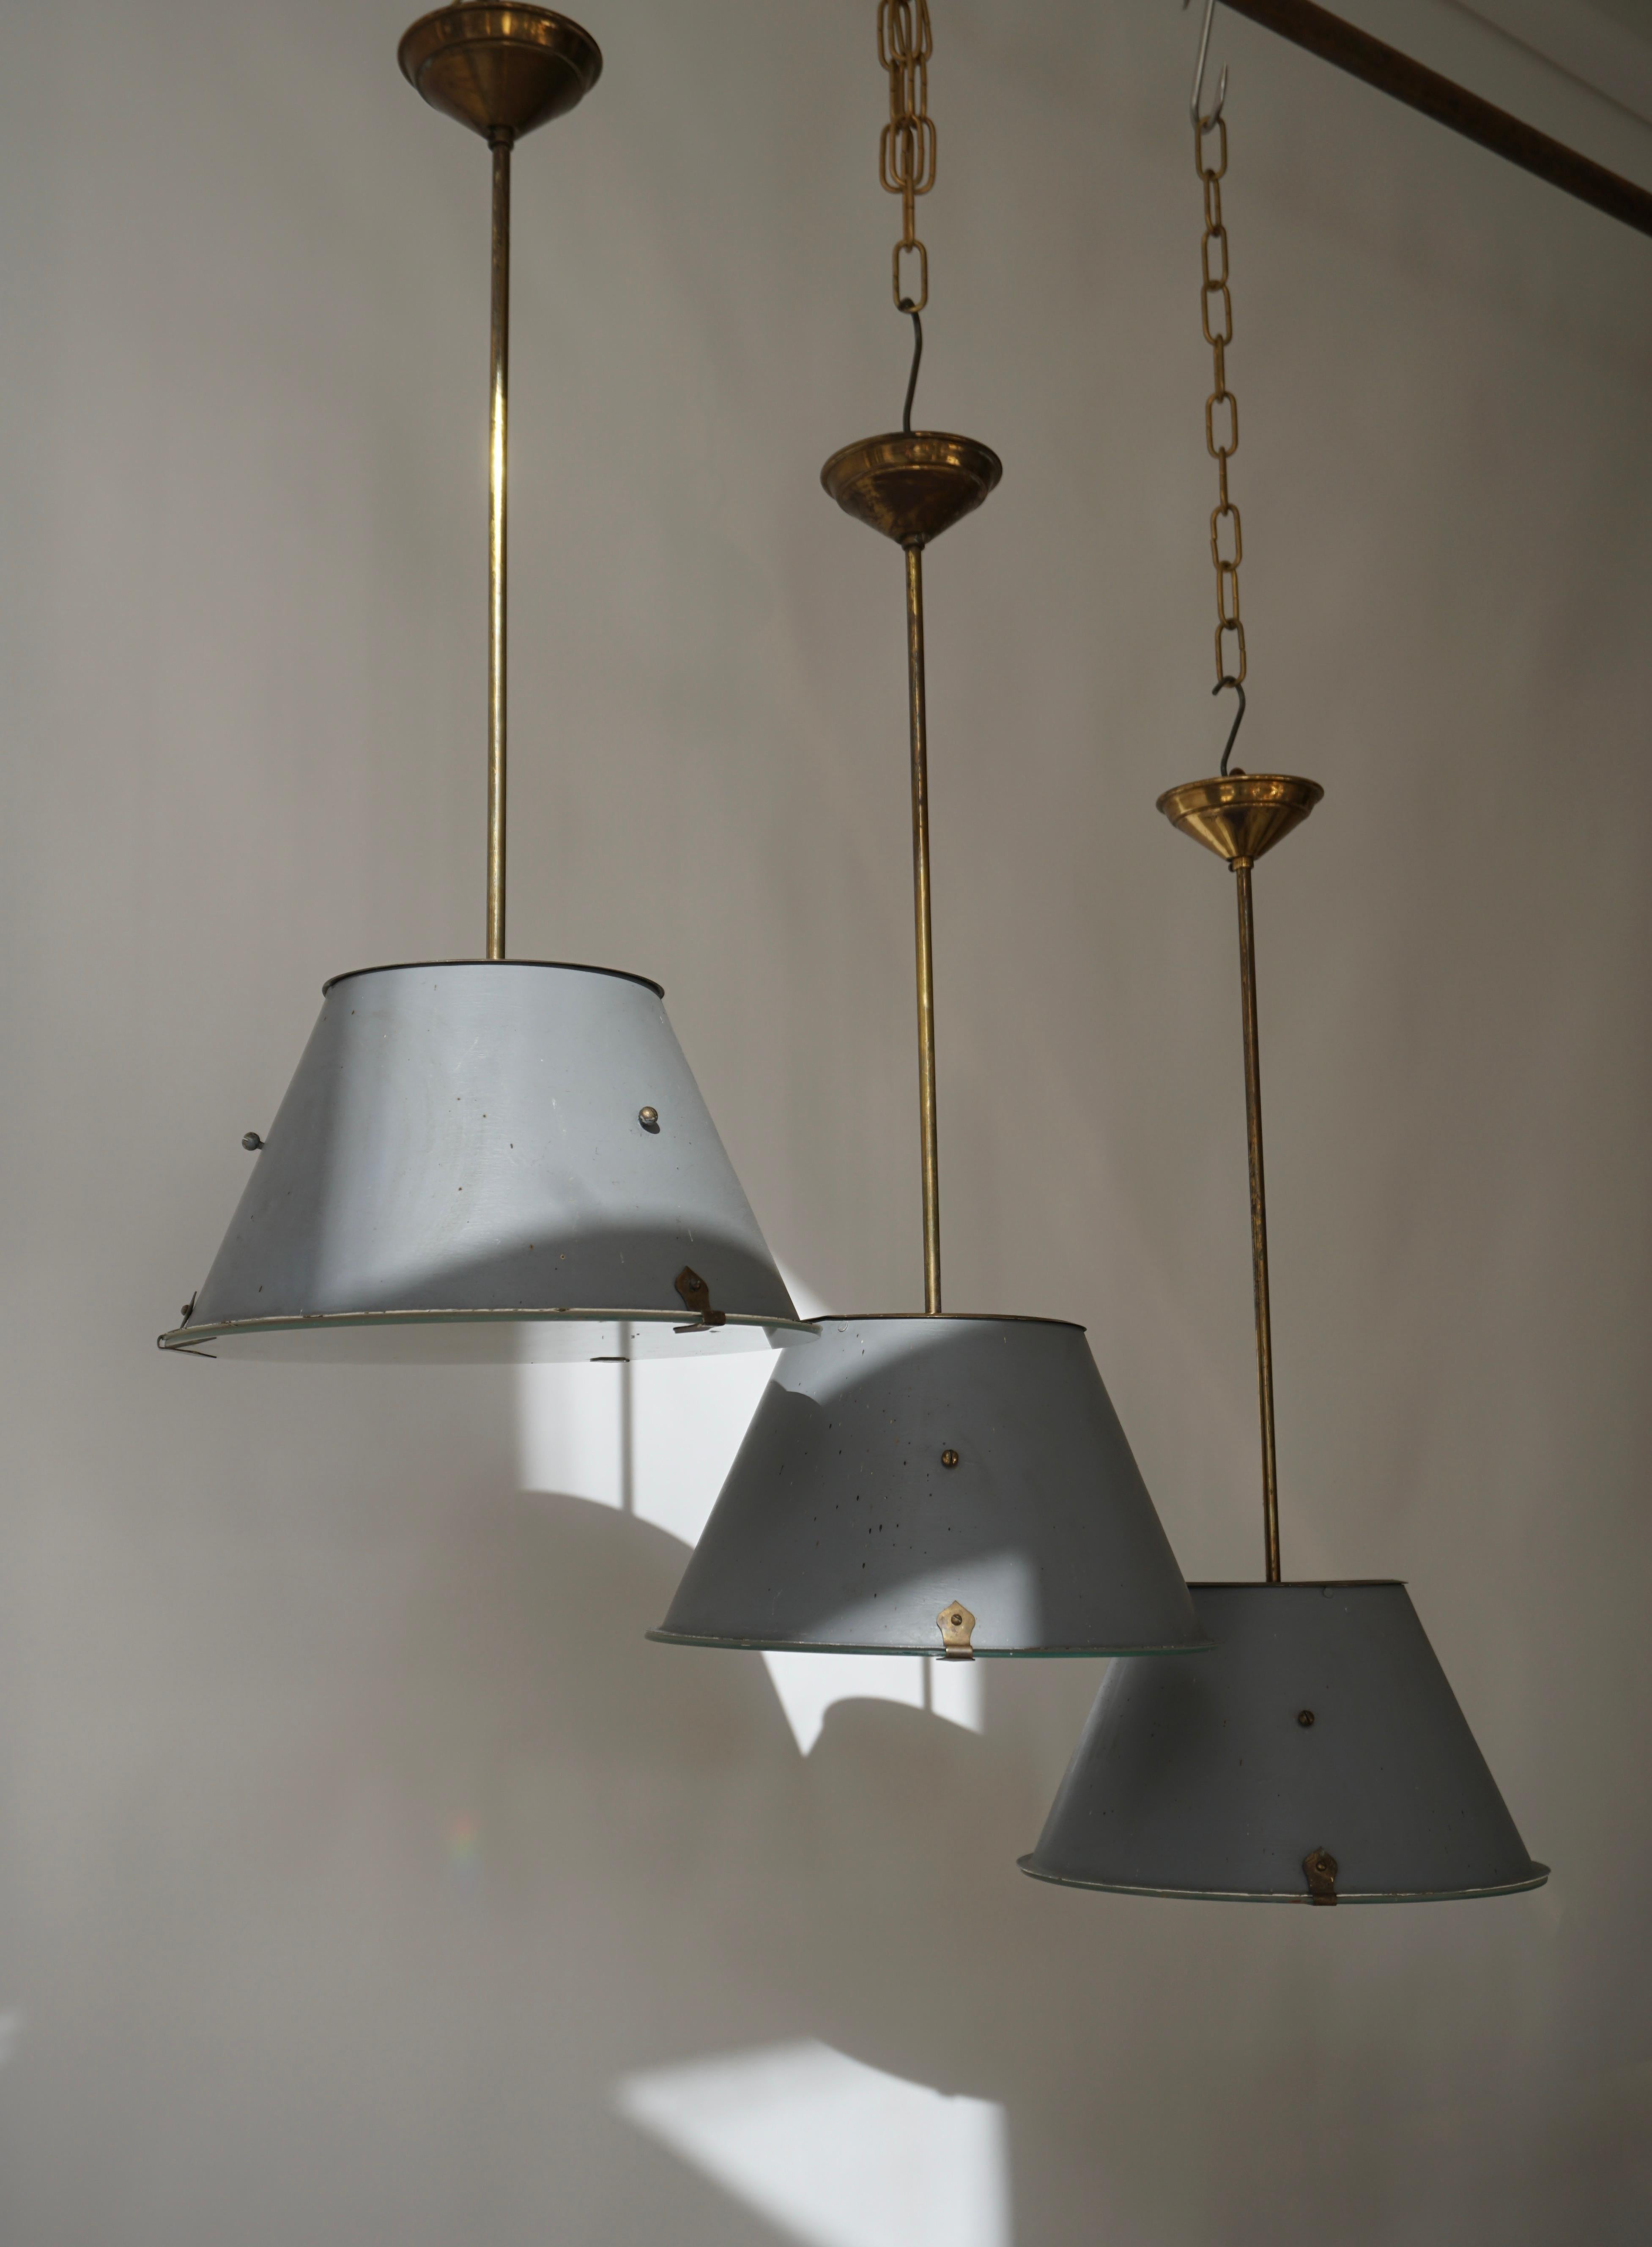 Three industrial Art Deco hanging lamps in glass and painted brass.

Diameter 32 cm.
Height 78 cm.

One E27 light bulb.